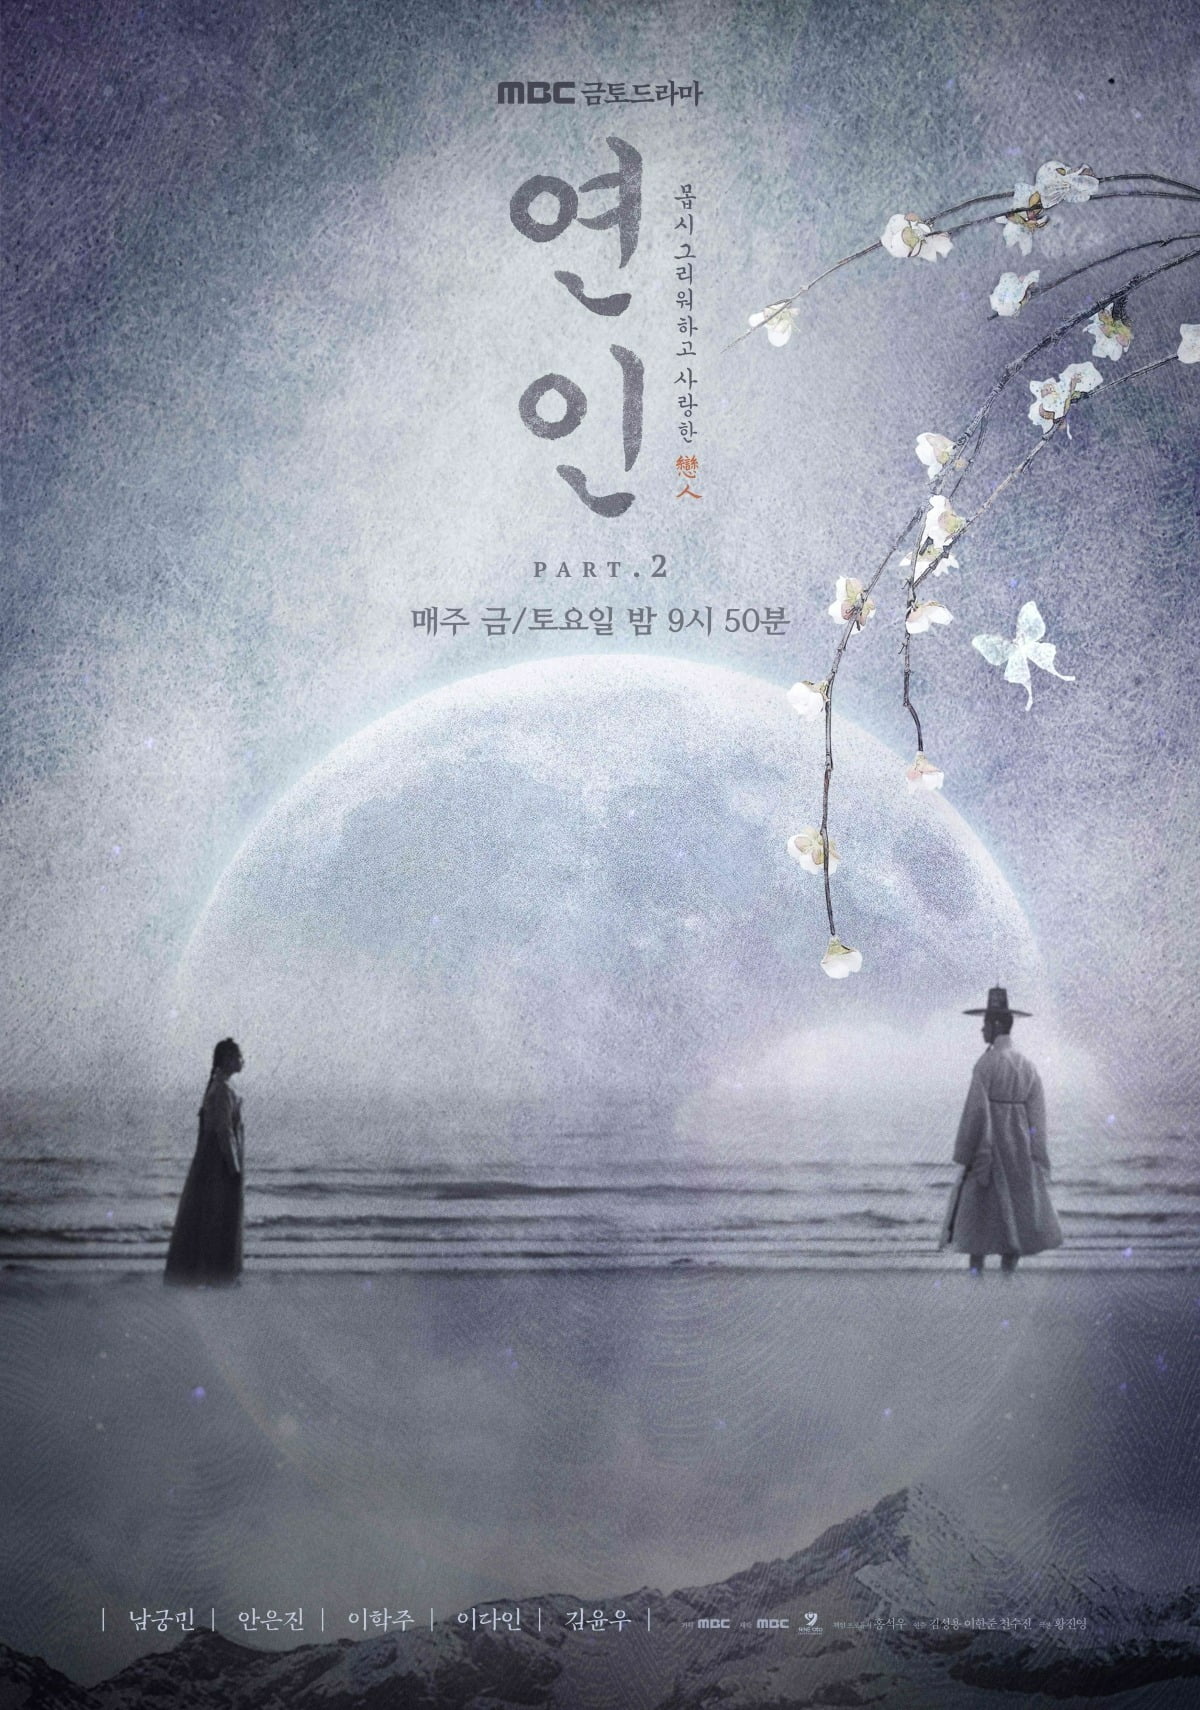 ‘My Dearest’ extended broadcast under review